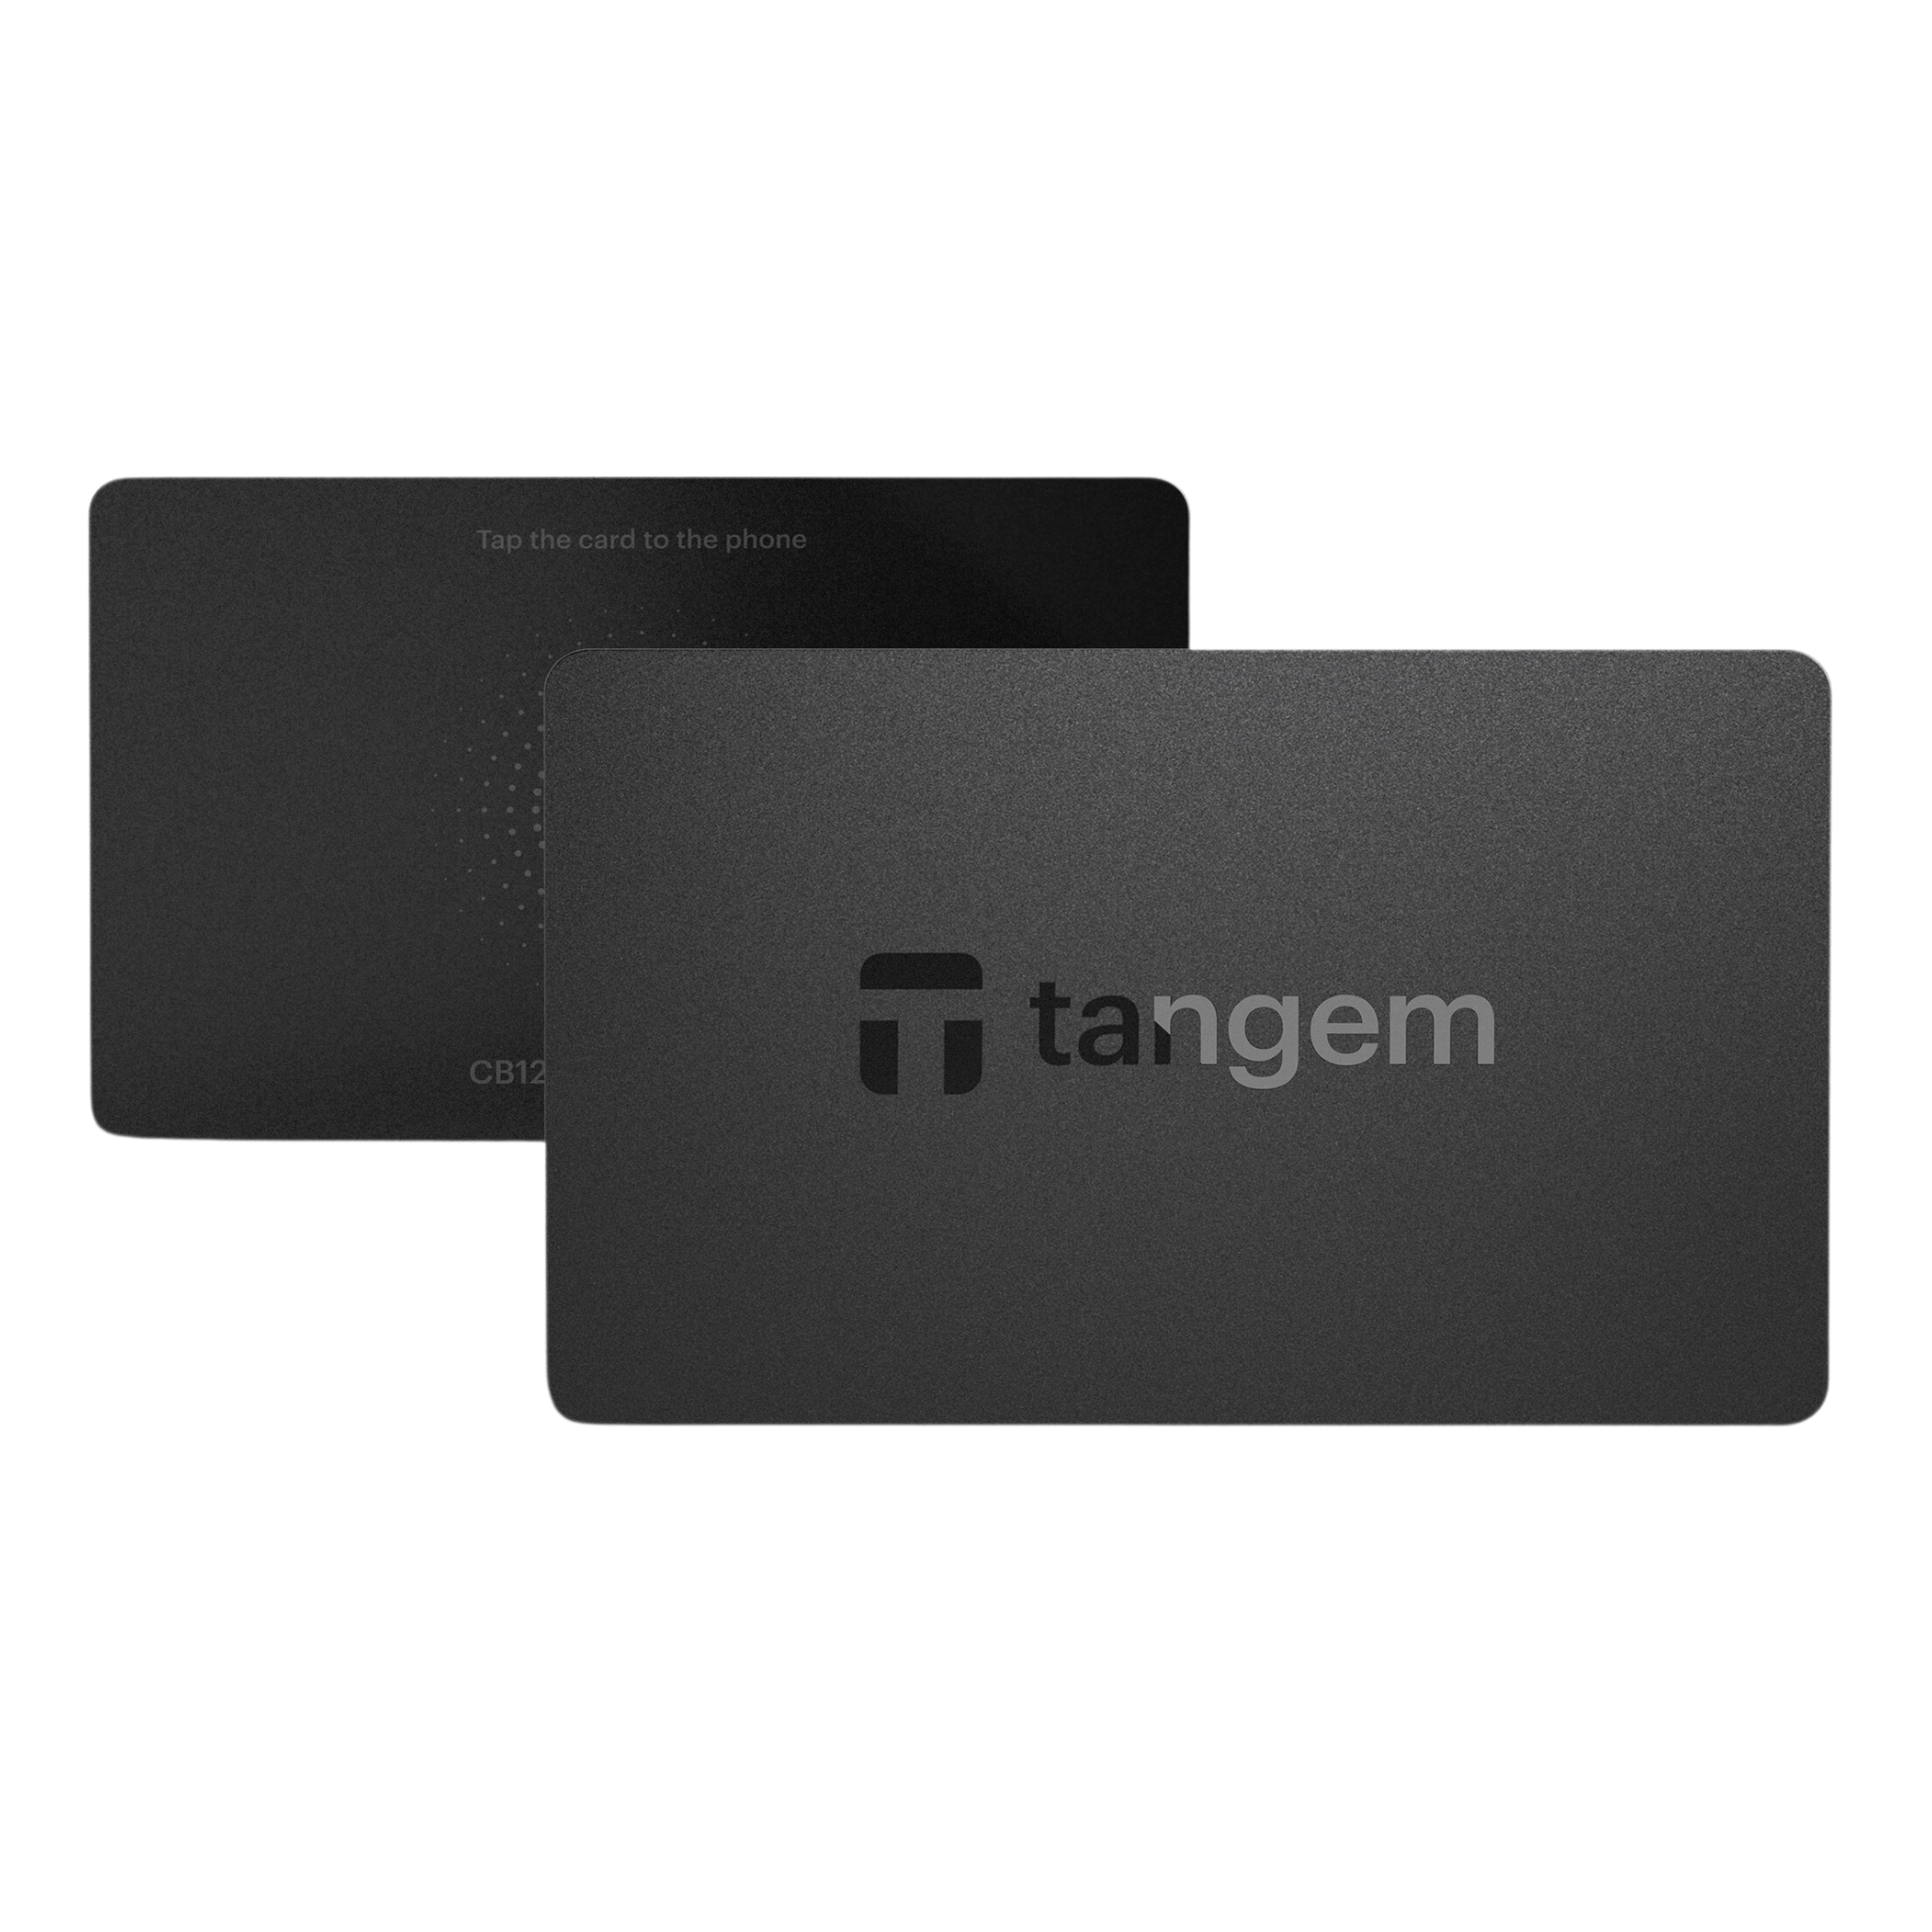 Tangem Wallet 2.0 2 Card Cryptocurrency Hardware Wallet Side Angle